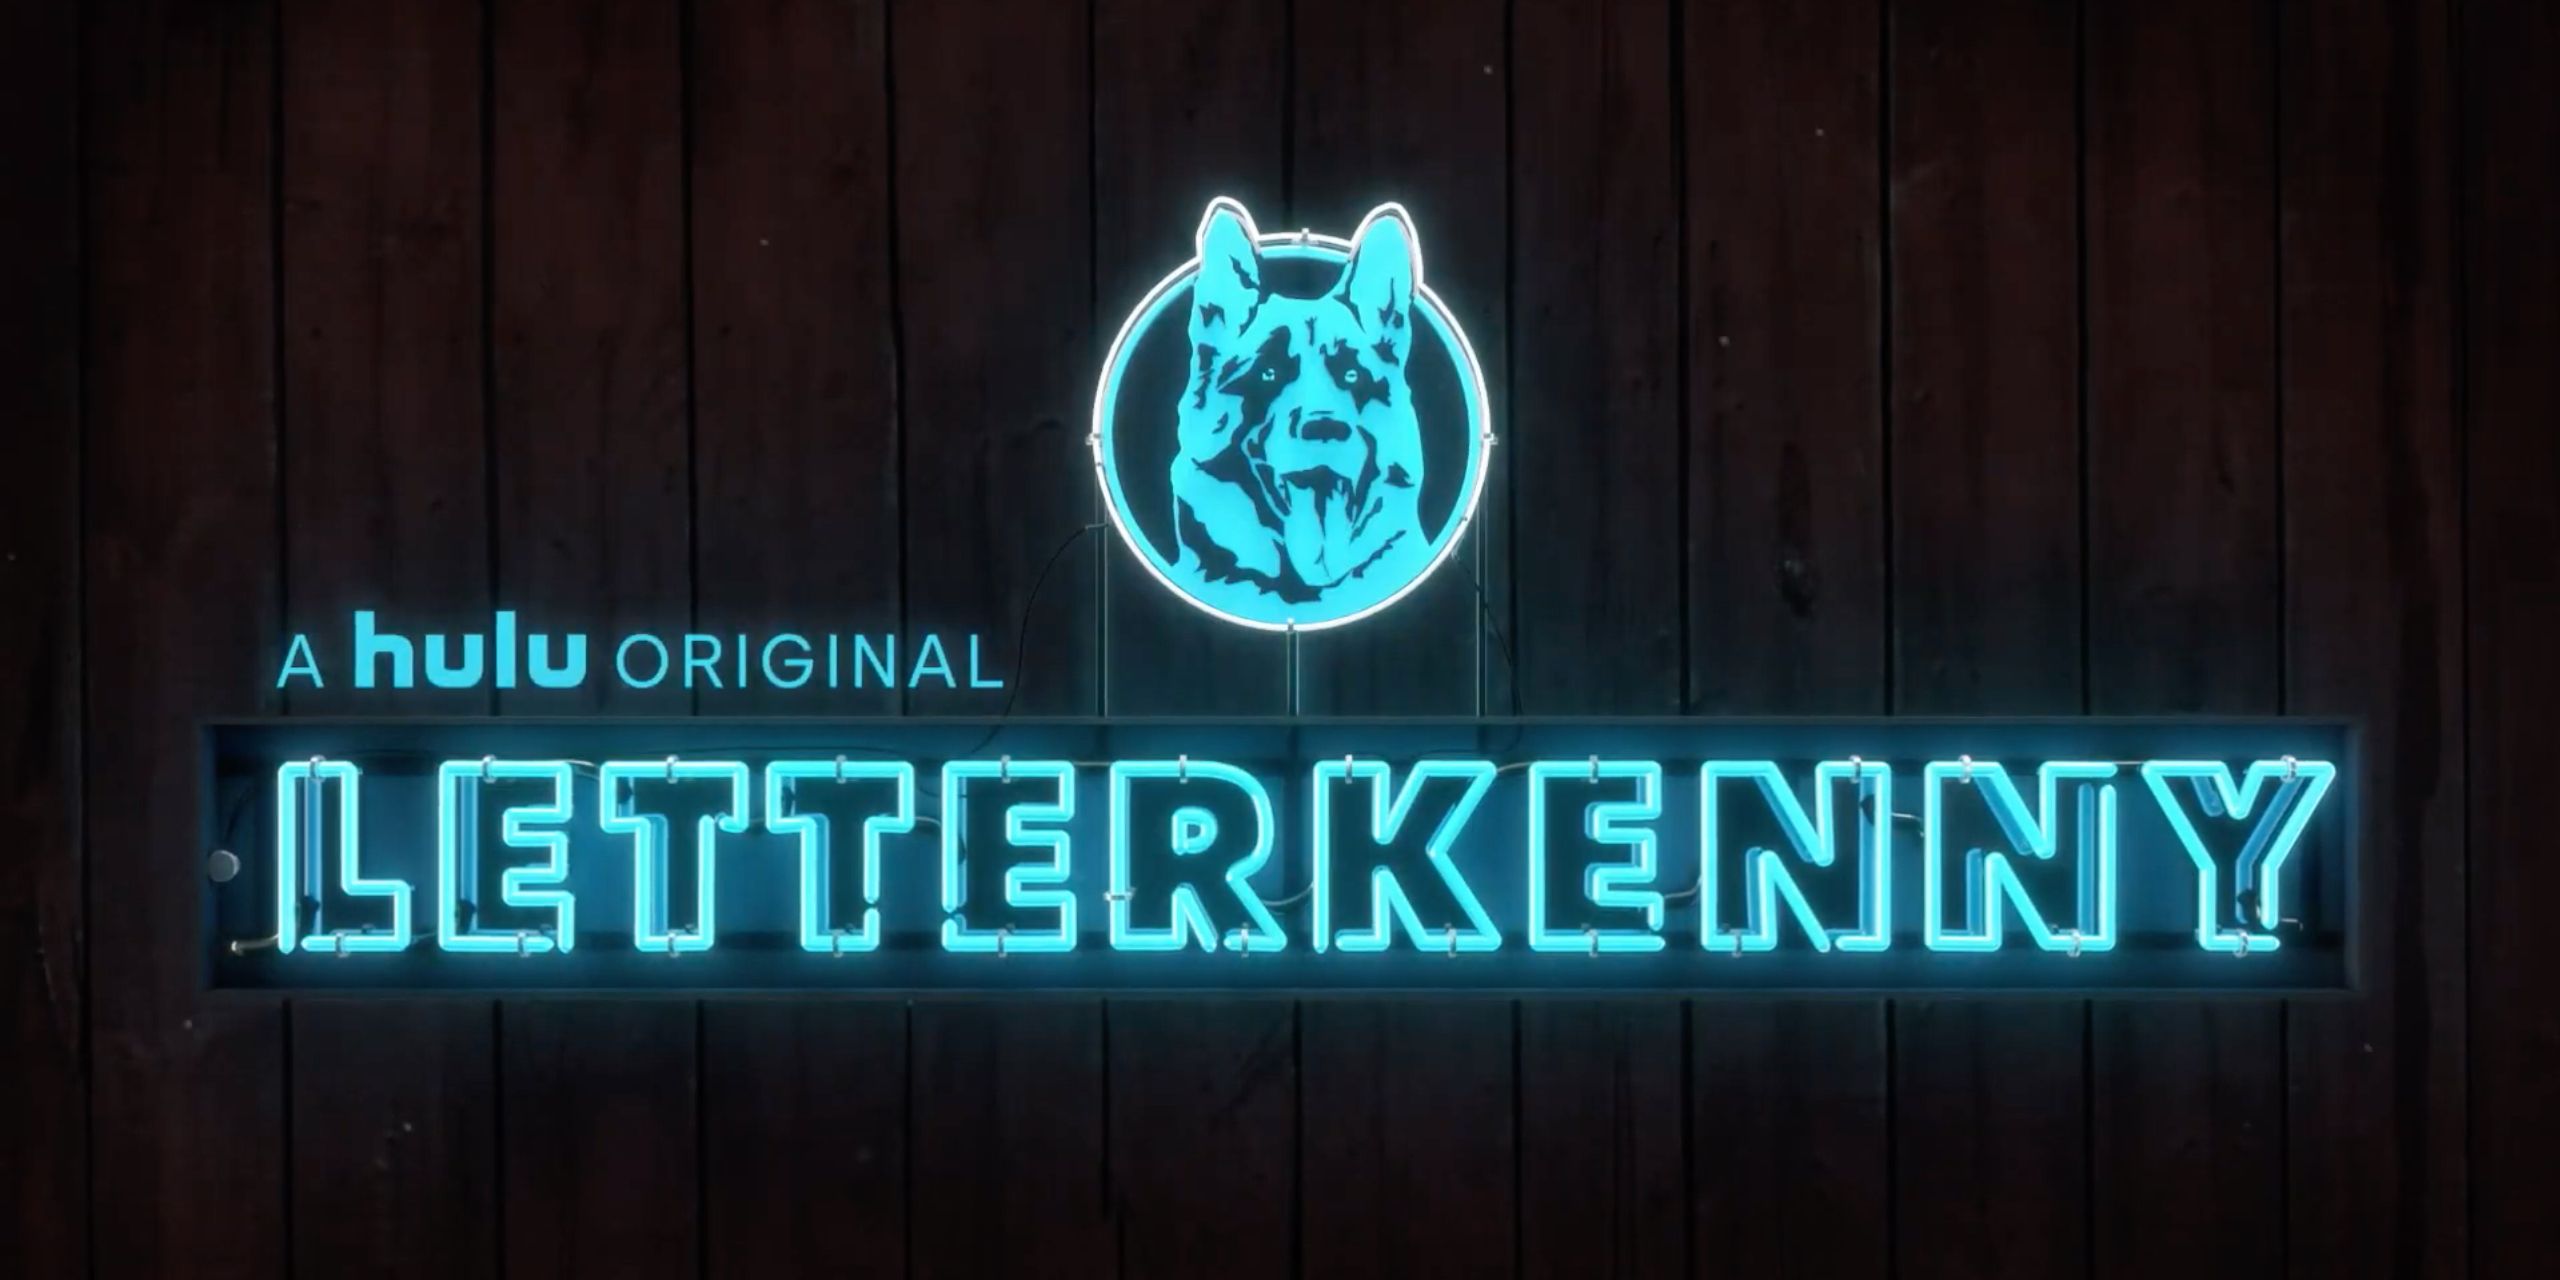 The title card for Letterkenny, but lit in neon